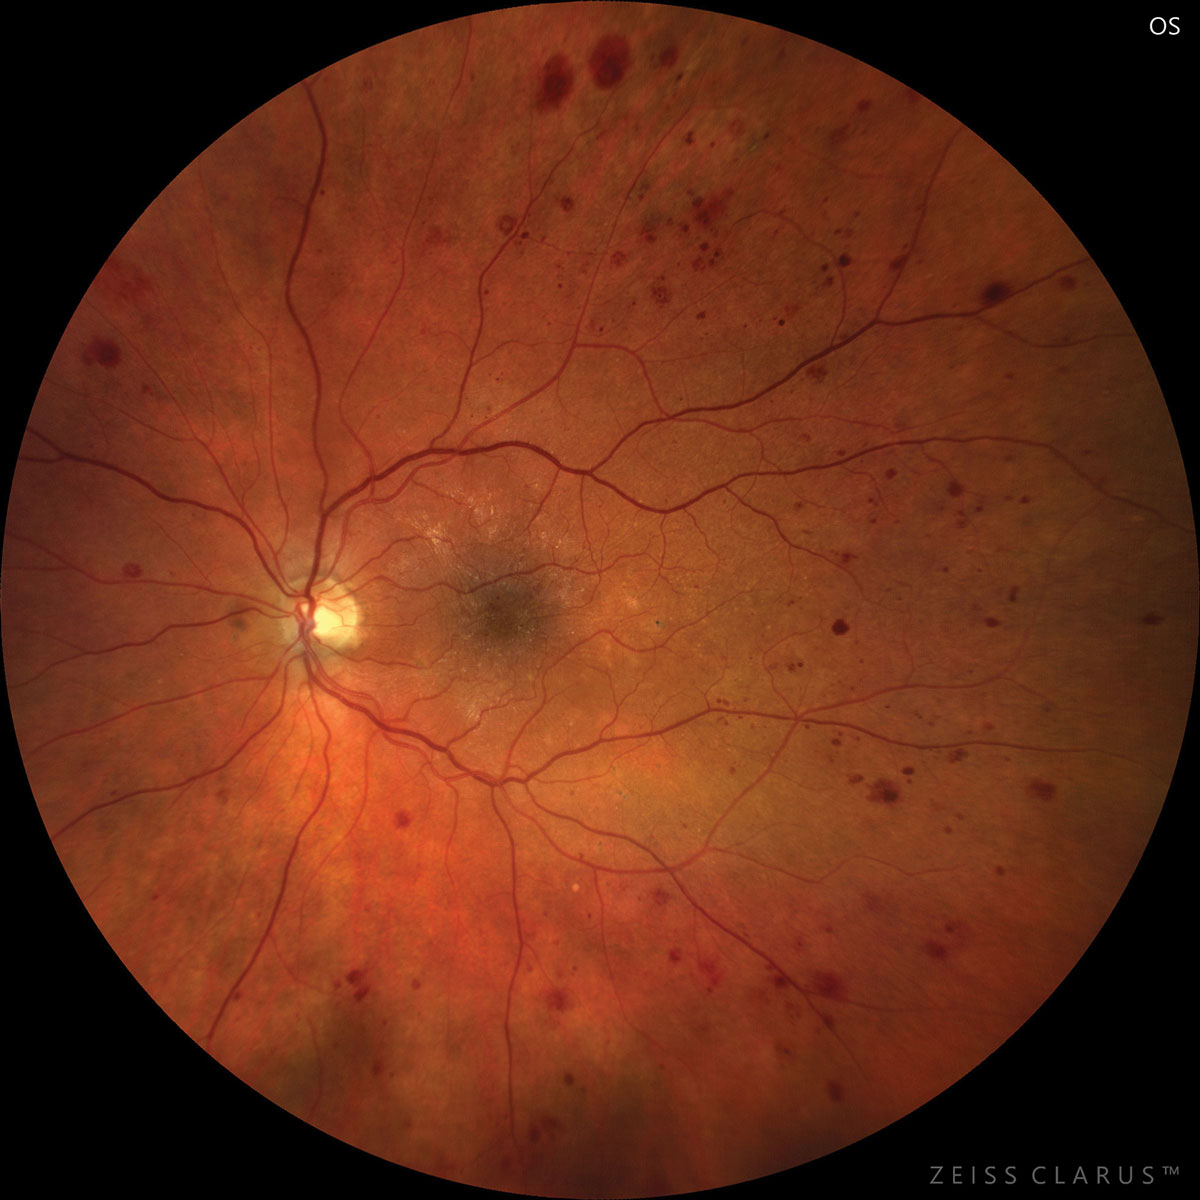 Patients with diabetic retinopathy—particularly in the earliest stages—should be educated about preventive measures that can help reduce their risk of experiencing severe cardiovascular incidents.